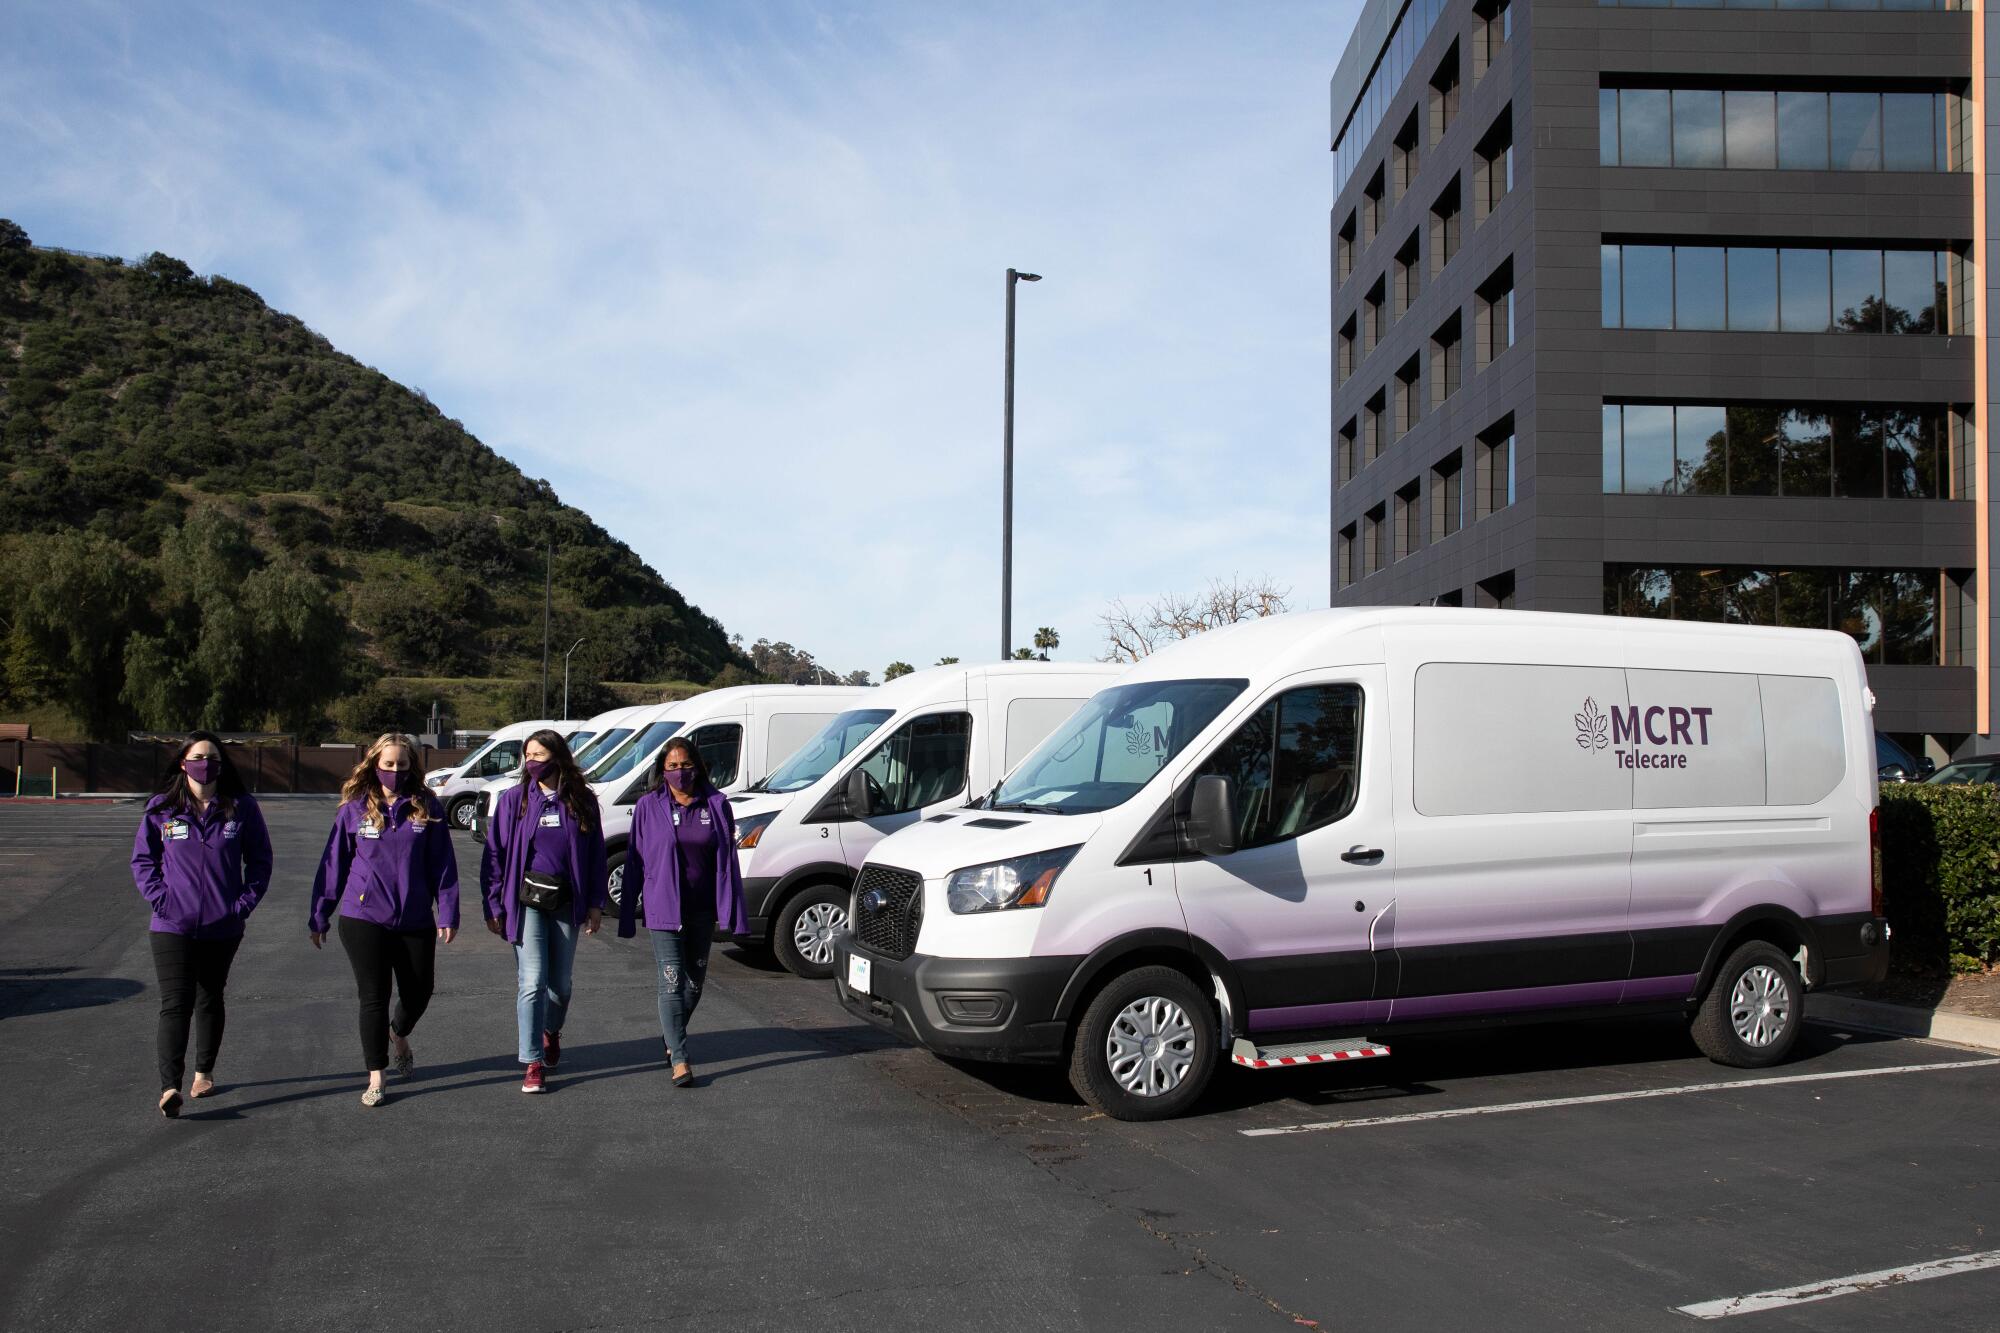 Four people in purple shirts walk near several white vans.